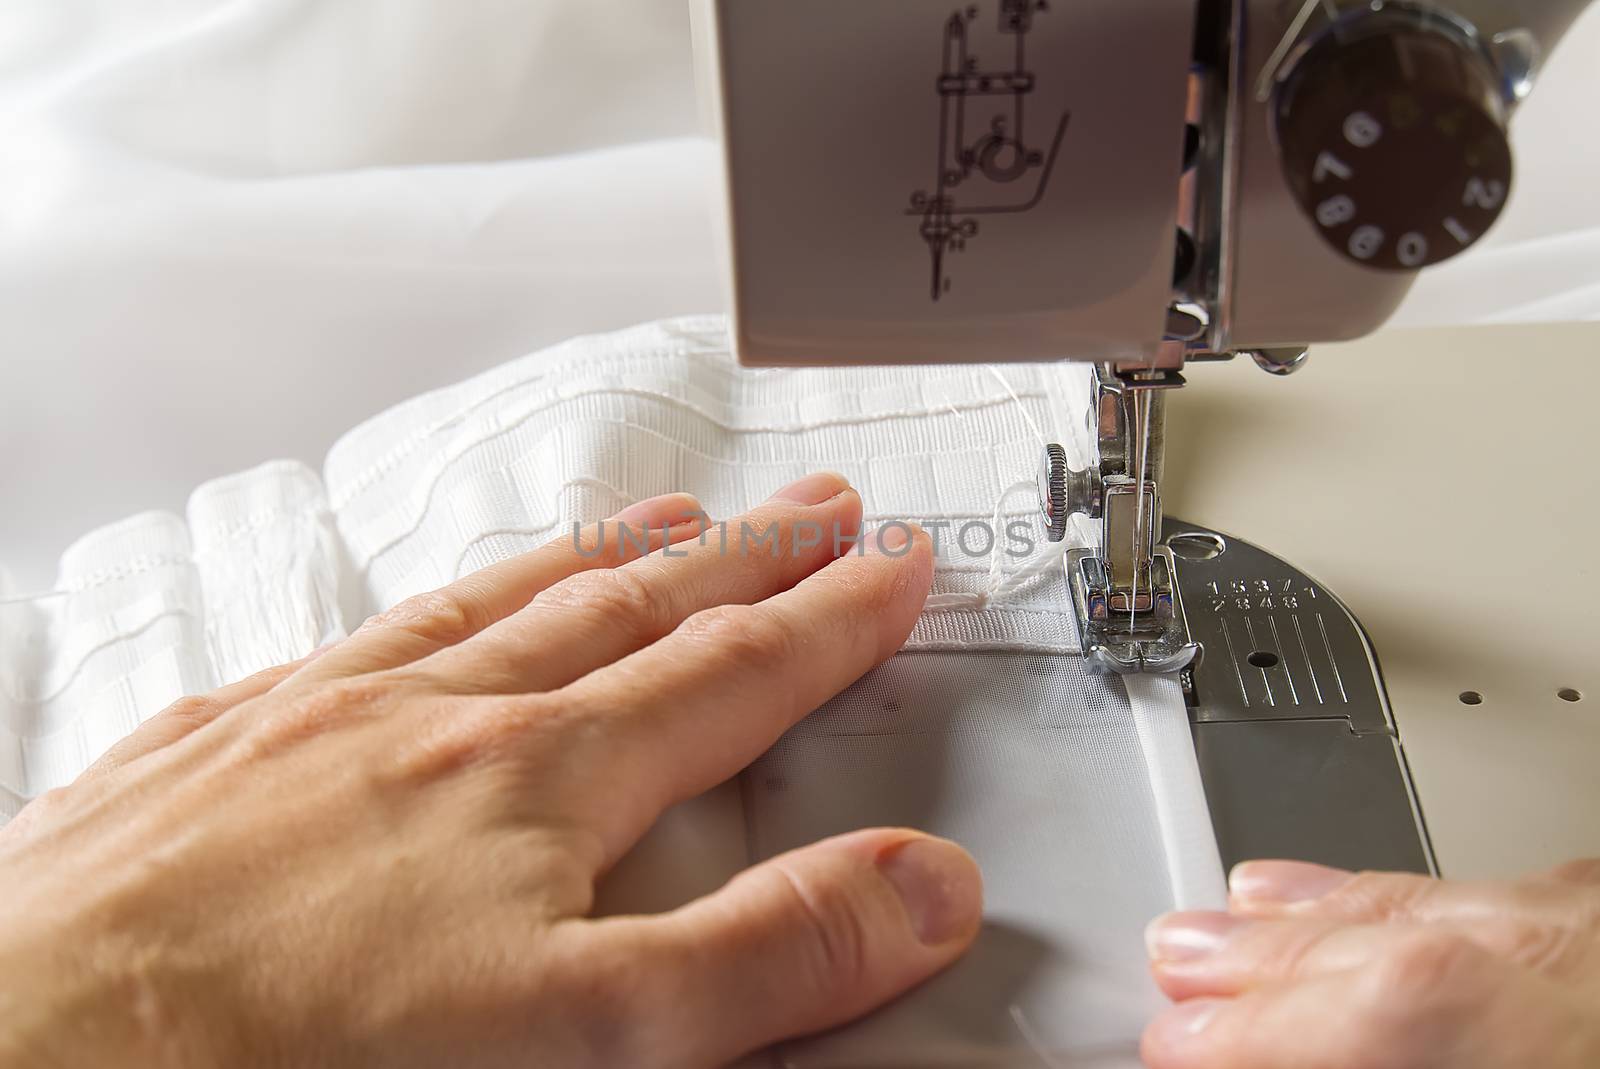 A woman works on a sewing machine. seamstress sews white curtains, close up view. by PhotoTime